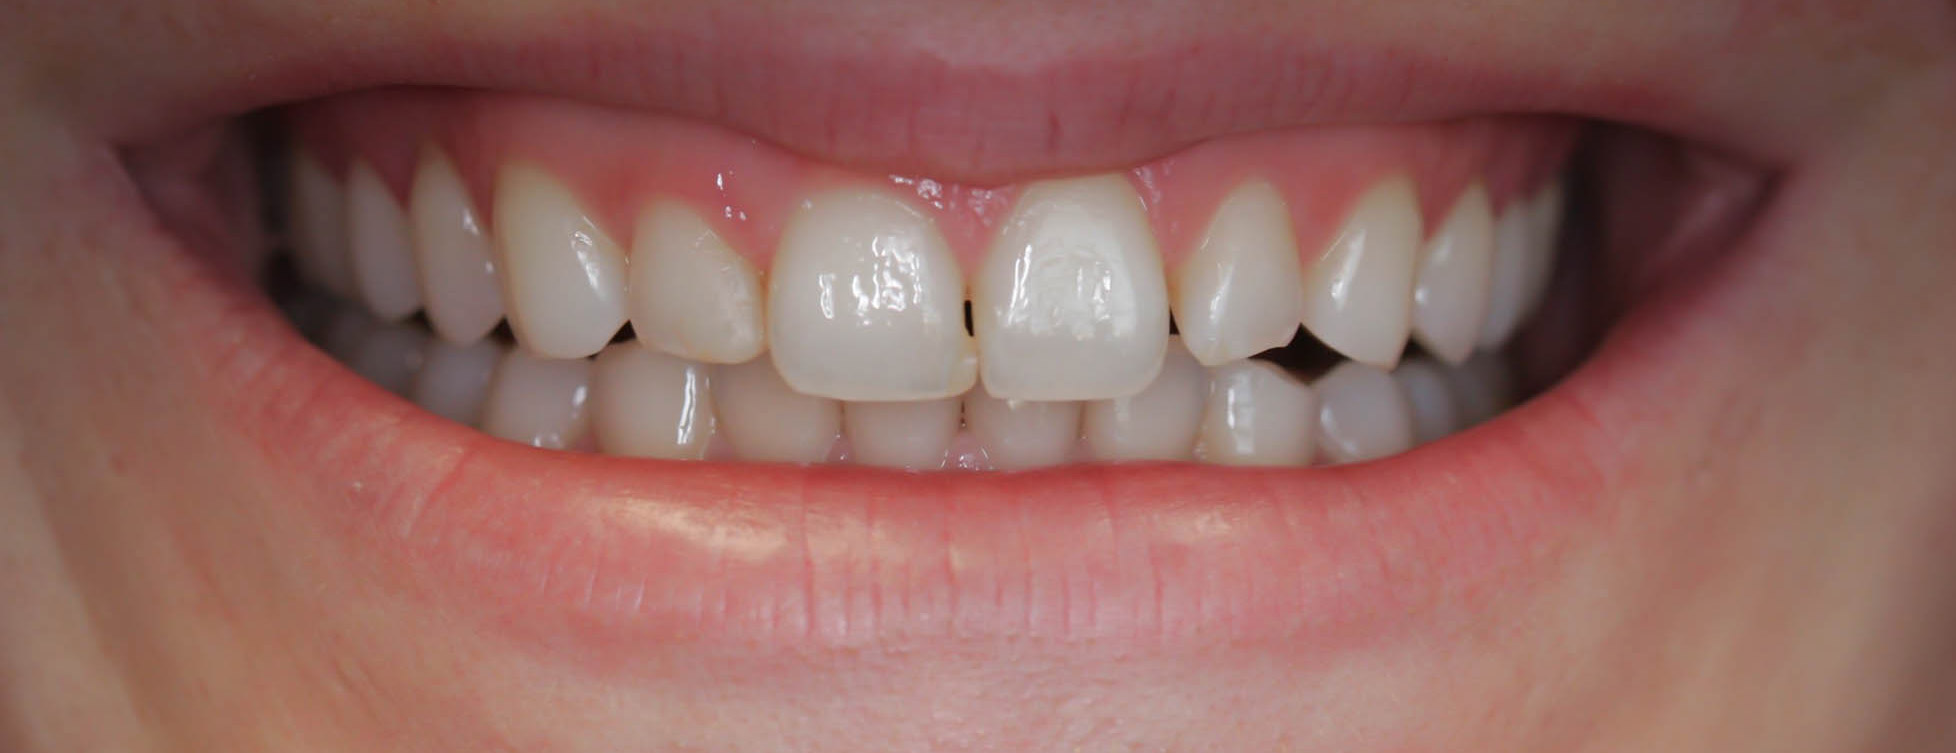 Esthetic bonding to fix small chips and gaps -- the Before picture